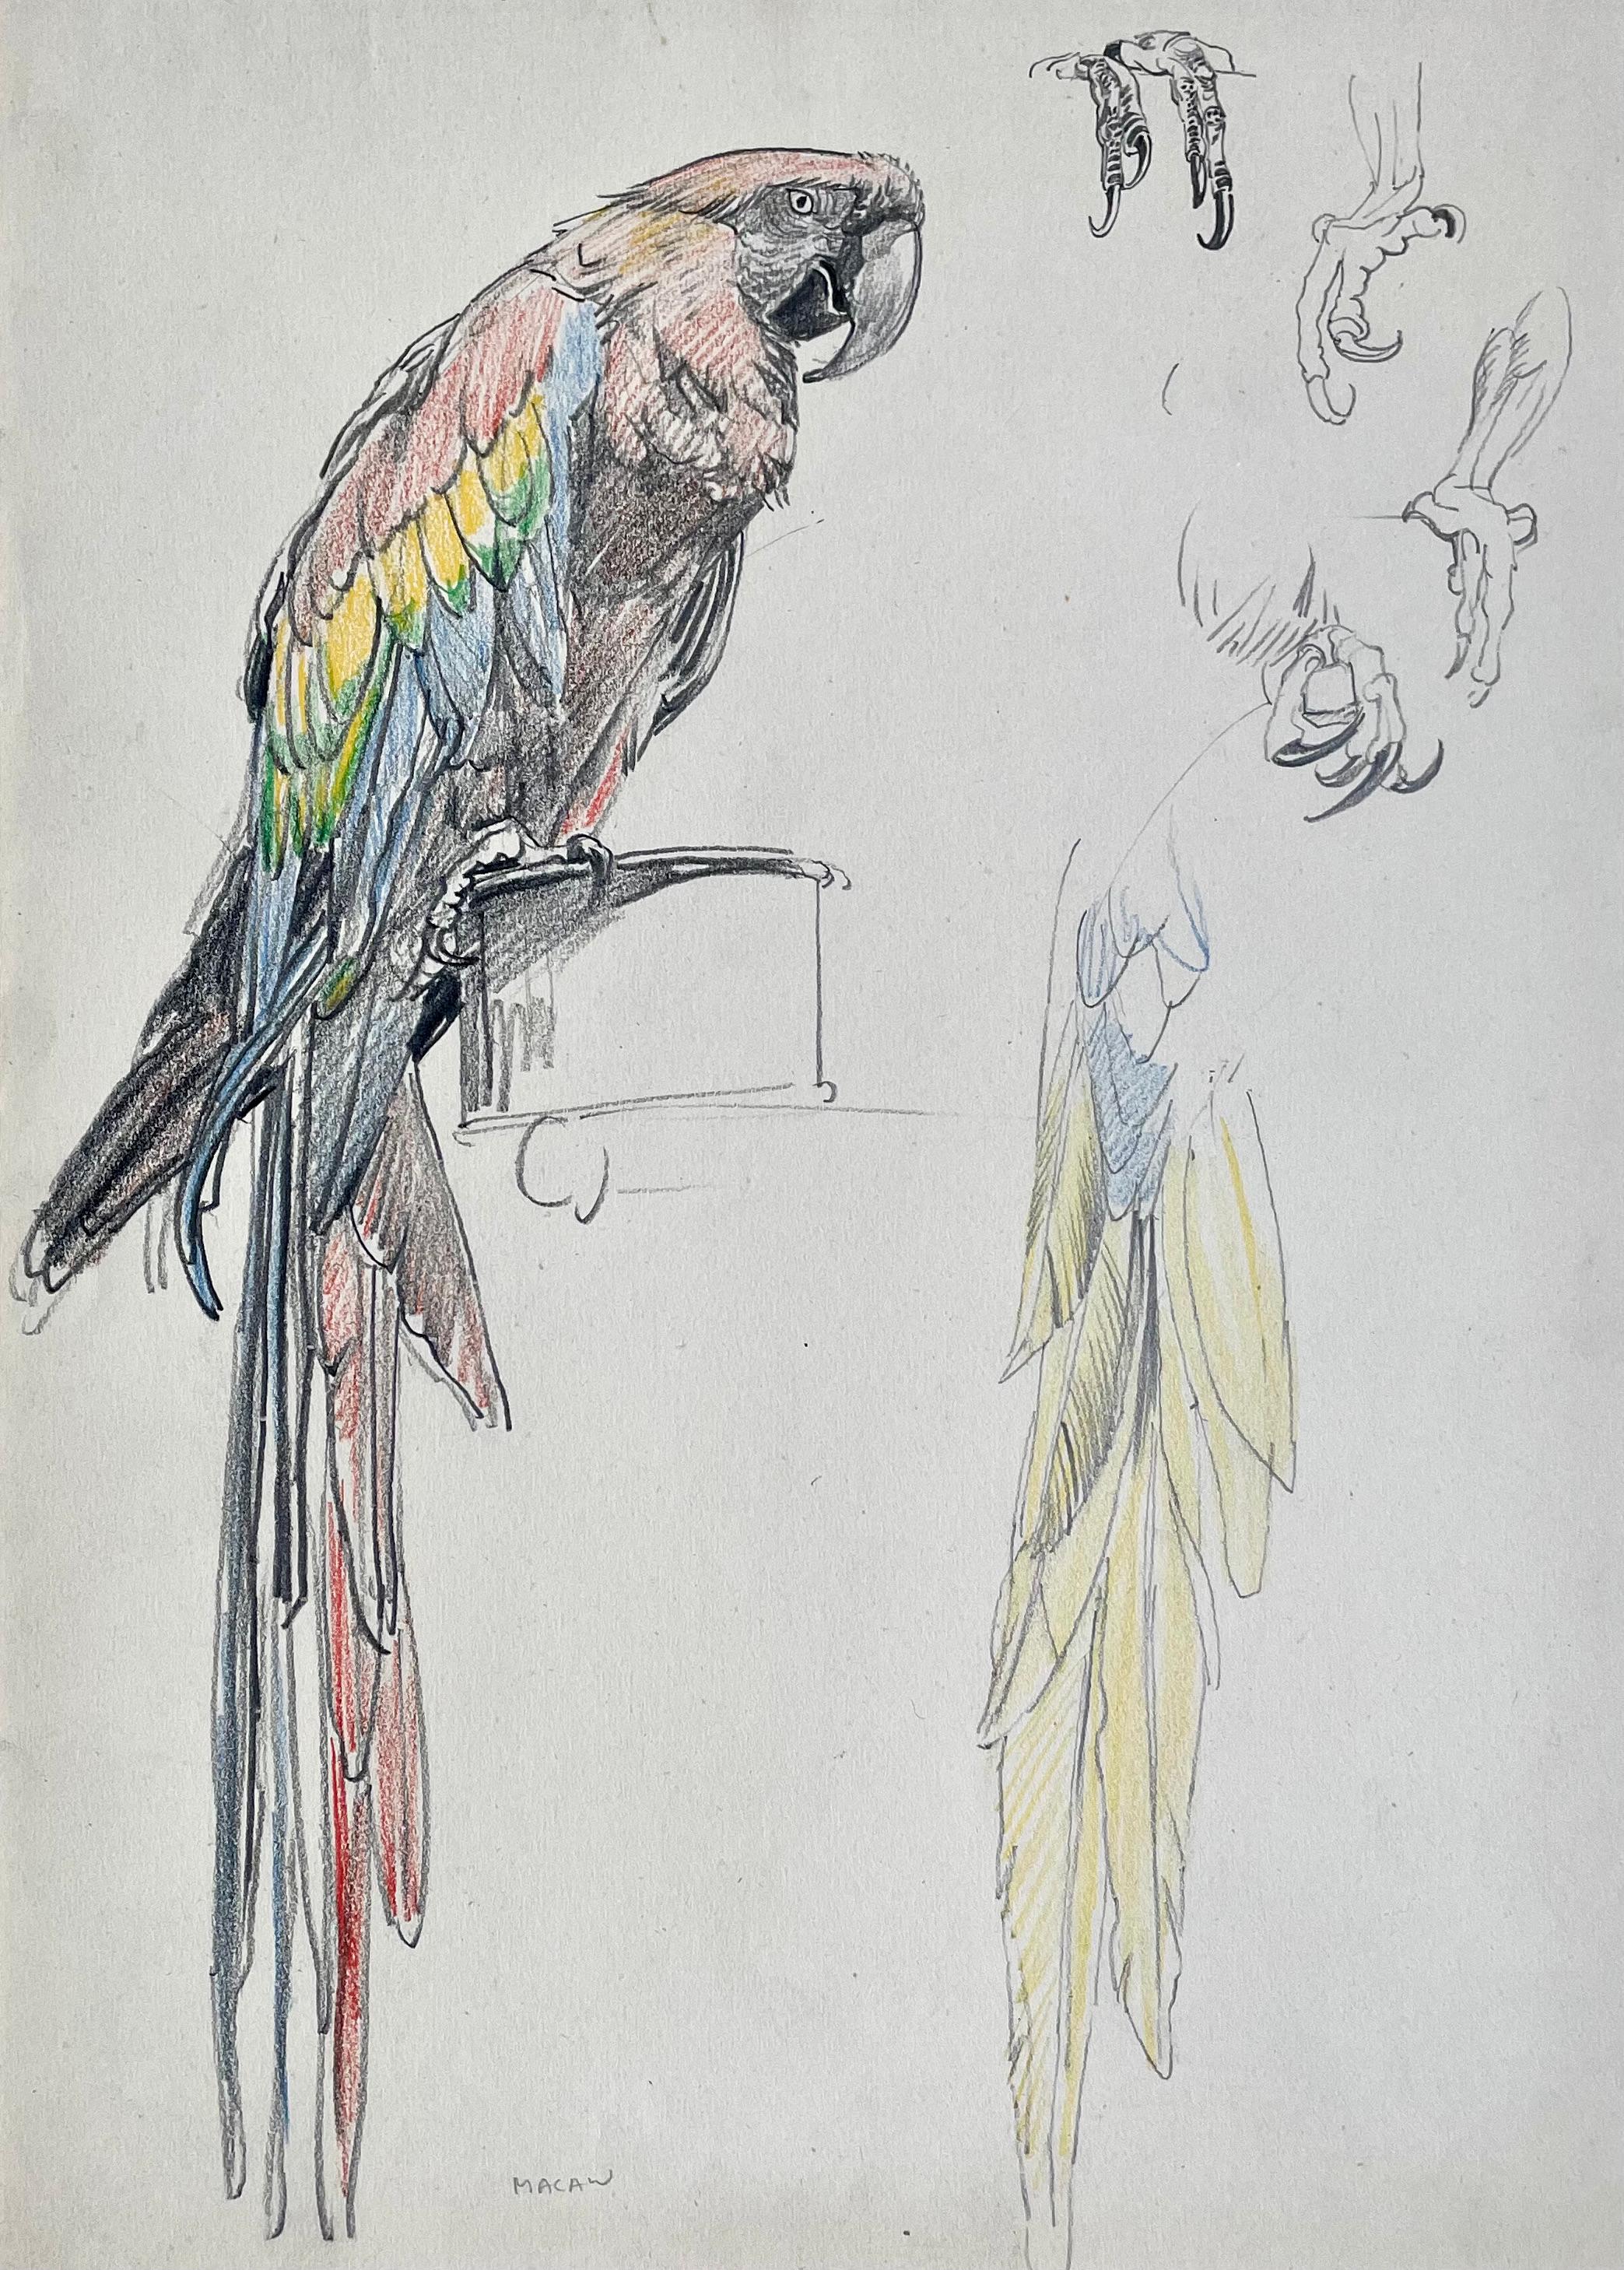 RAYMOND SHEPPARD
(1913-1958)

Macaw

Inscribed with title l.c.
Coloured chalks and pencil
Unframed

33.5 by 24 cm., 13 ¼ by 9 ½ in.
(mount size 56 by 40.5 cm., 22 by 16 in.)

Provenance:
Christine Sheppard, the artist’s daughter;
Paul Liss, Raymond